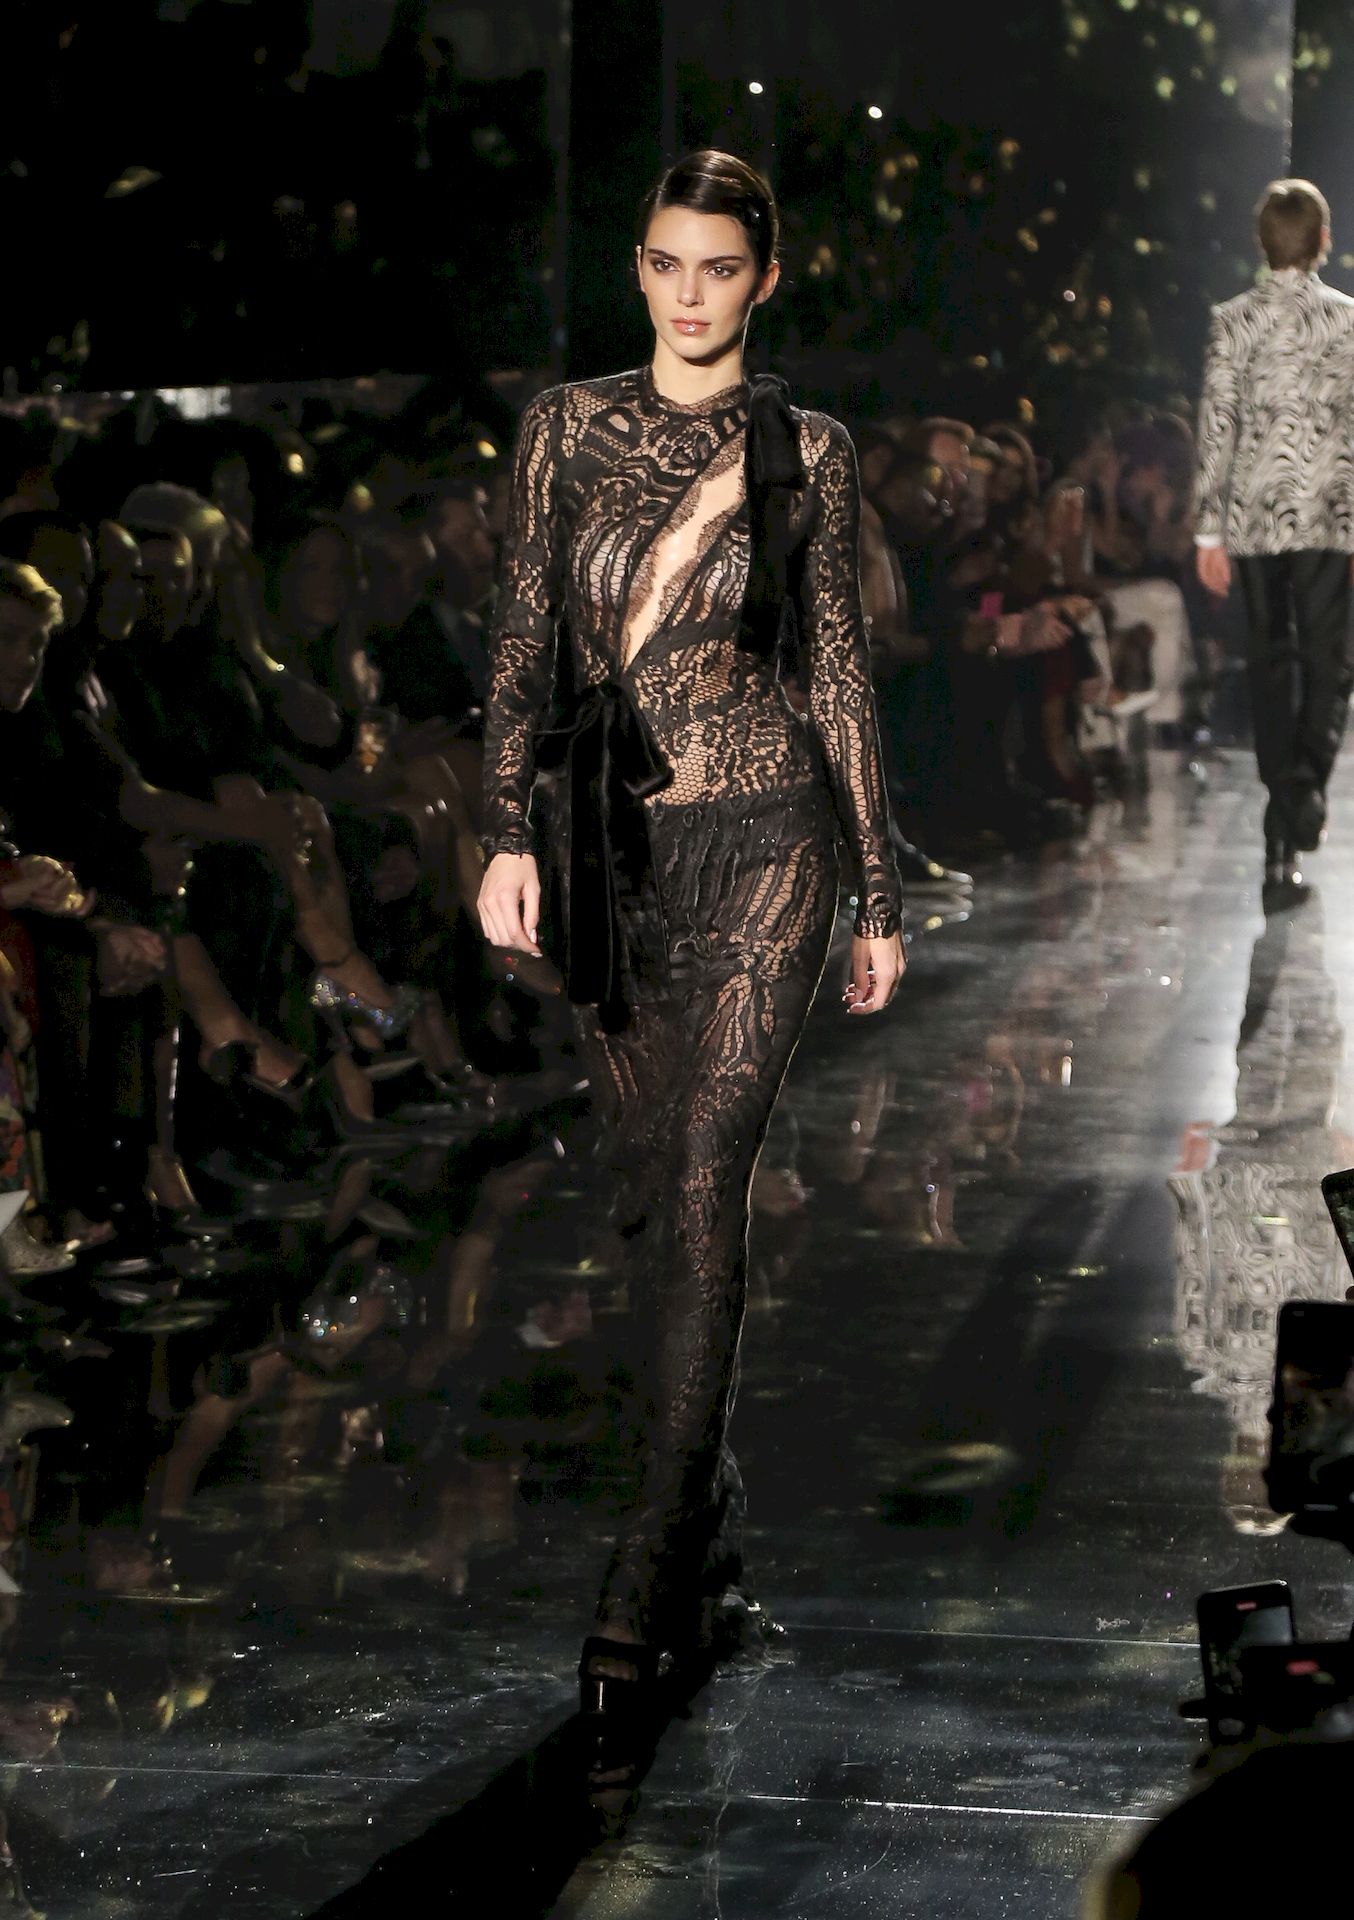 Kendall-Jenner-Walks-the-Runway-During-the-Tom-Ford-Show-0002.jpg